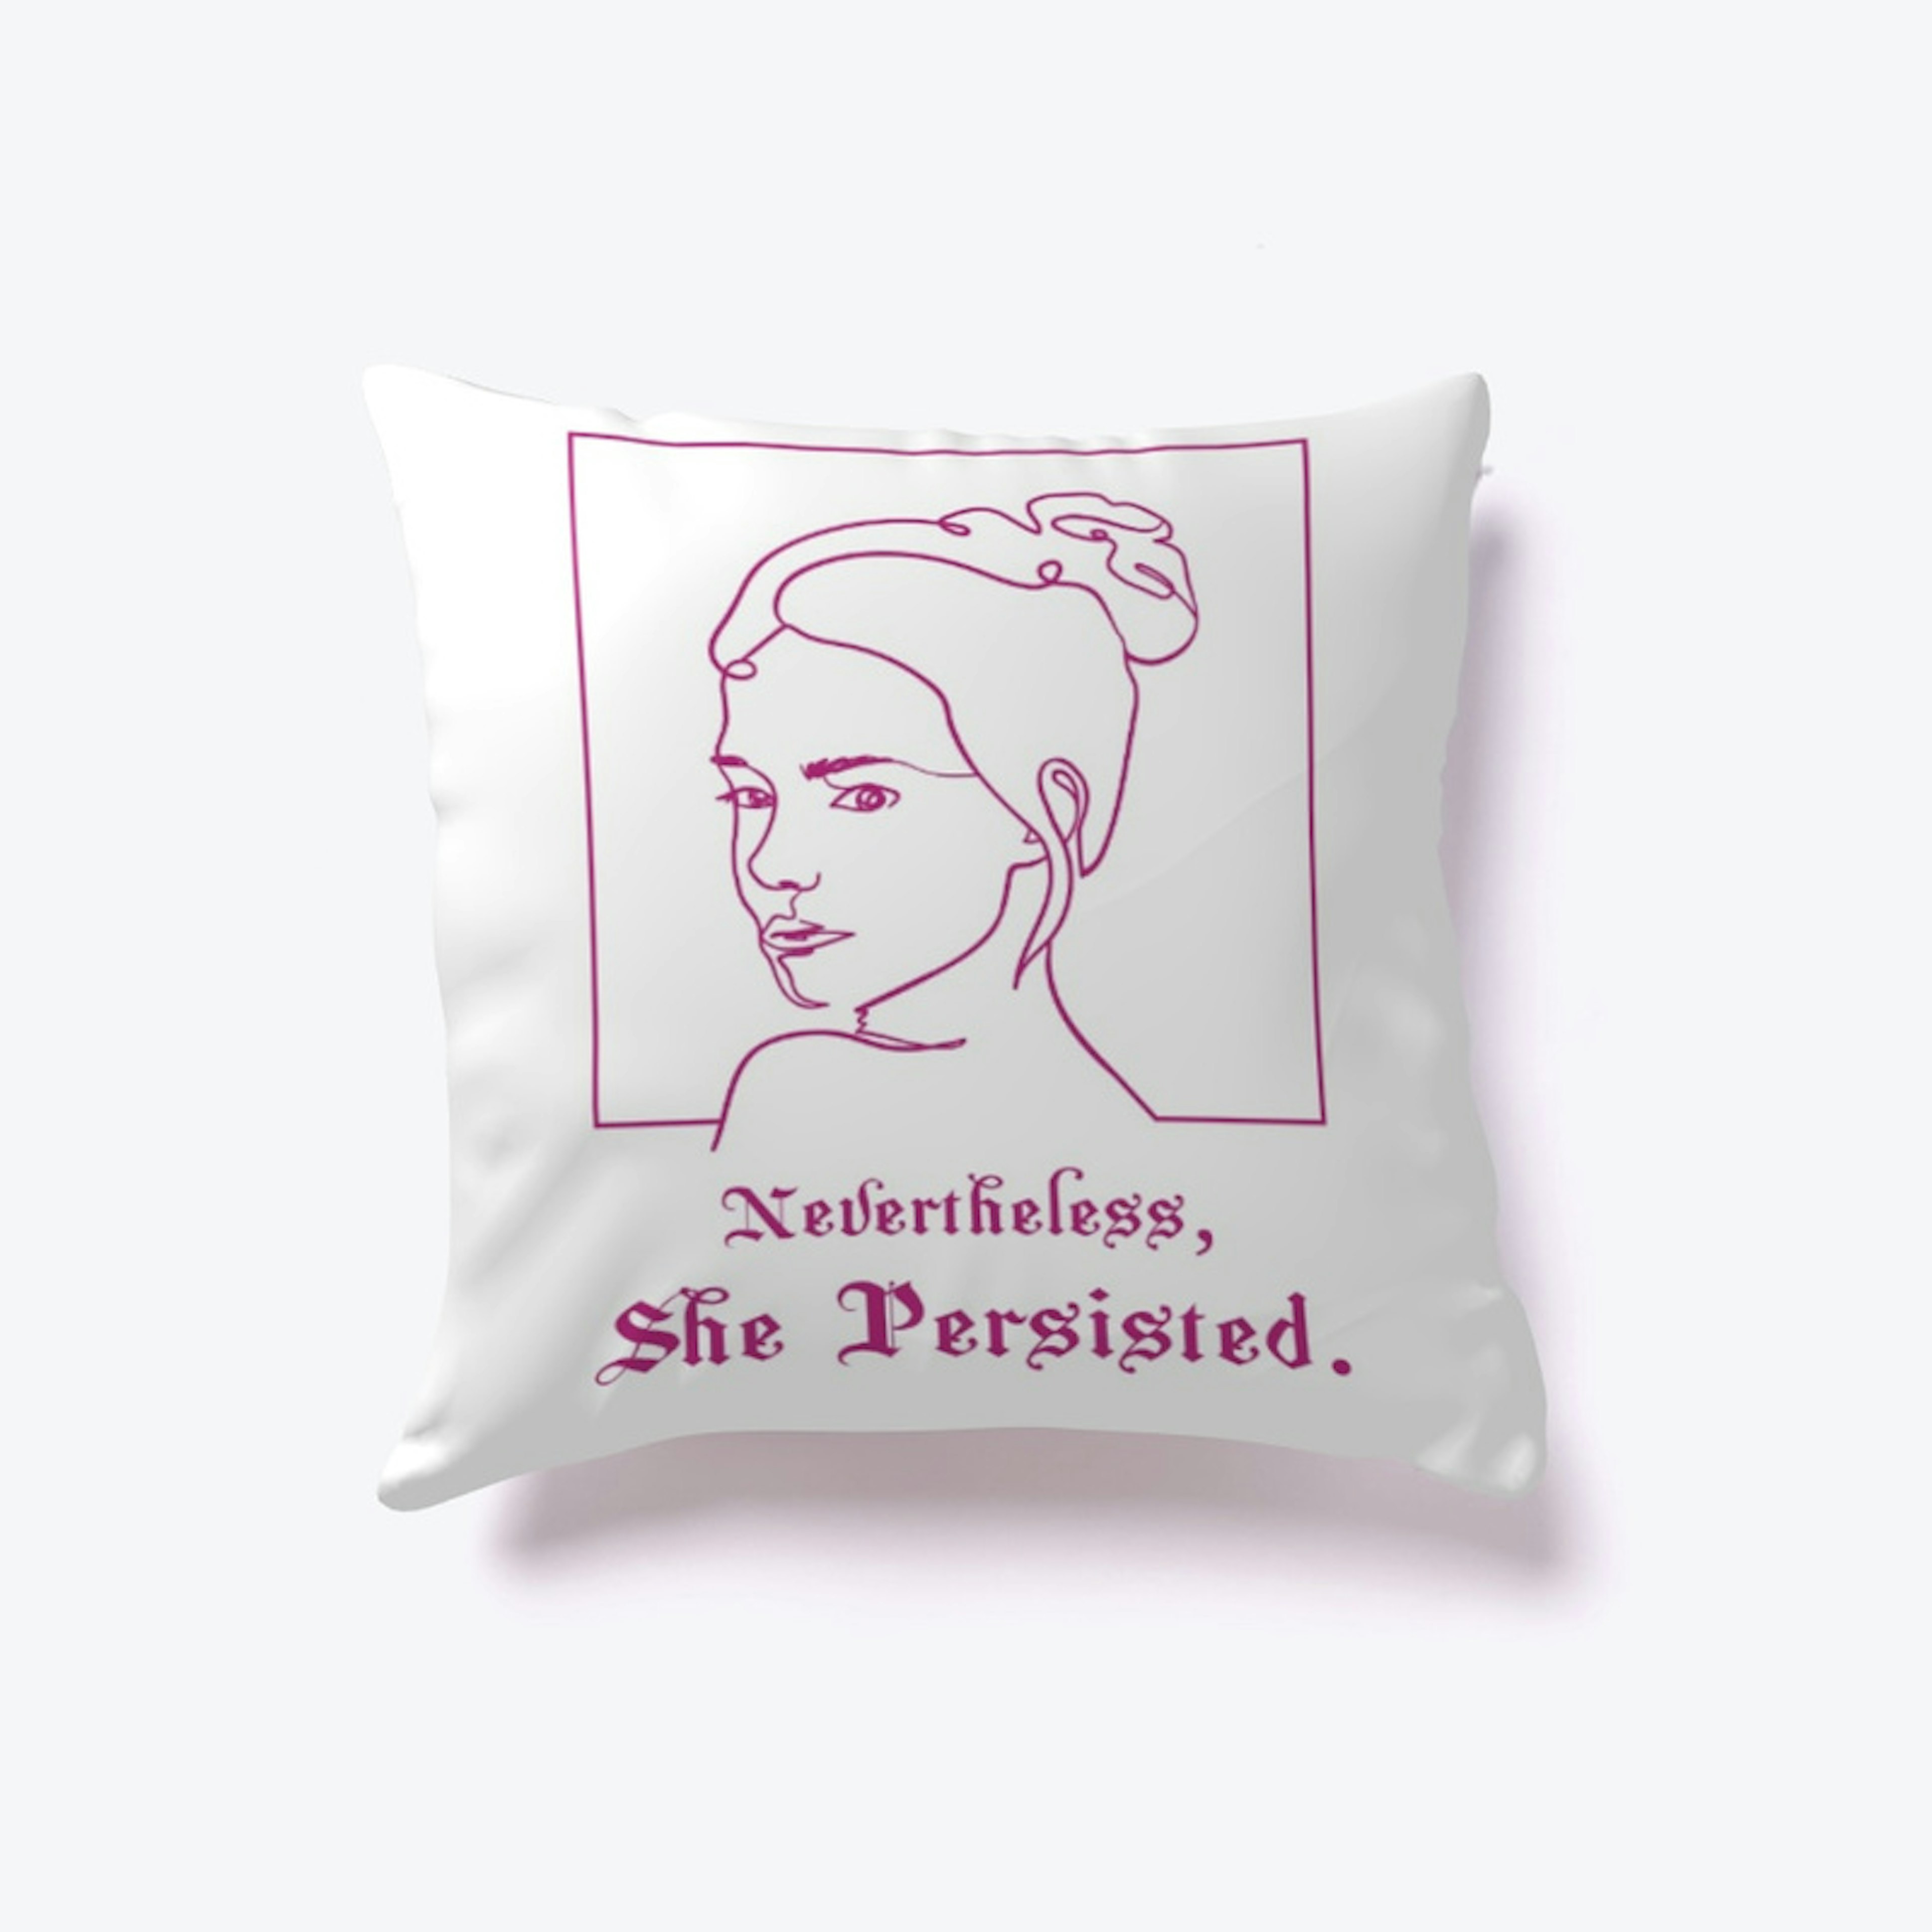 Nevertheless, She Persisted|Empowering